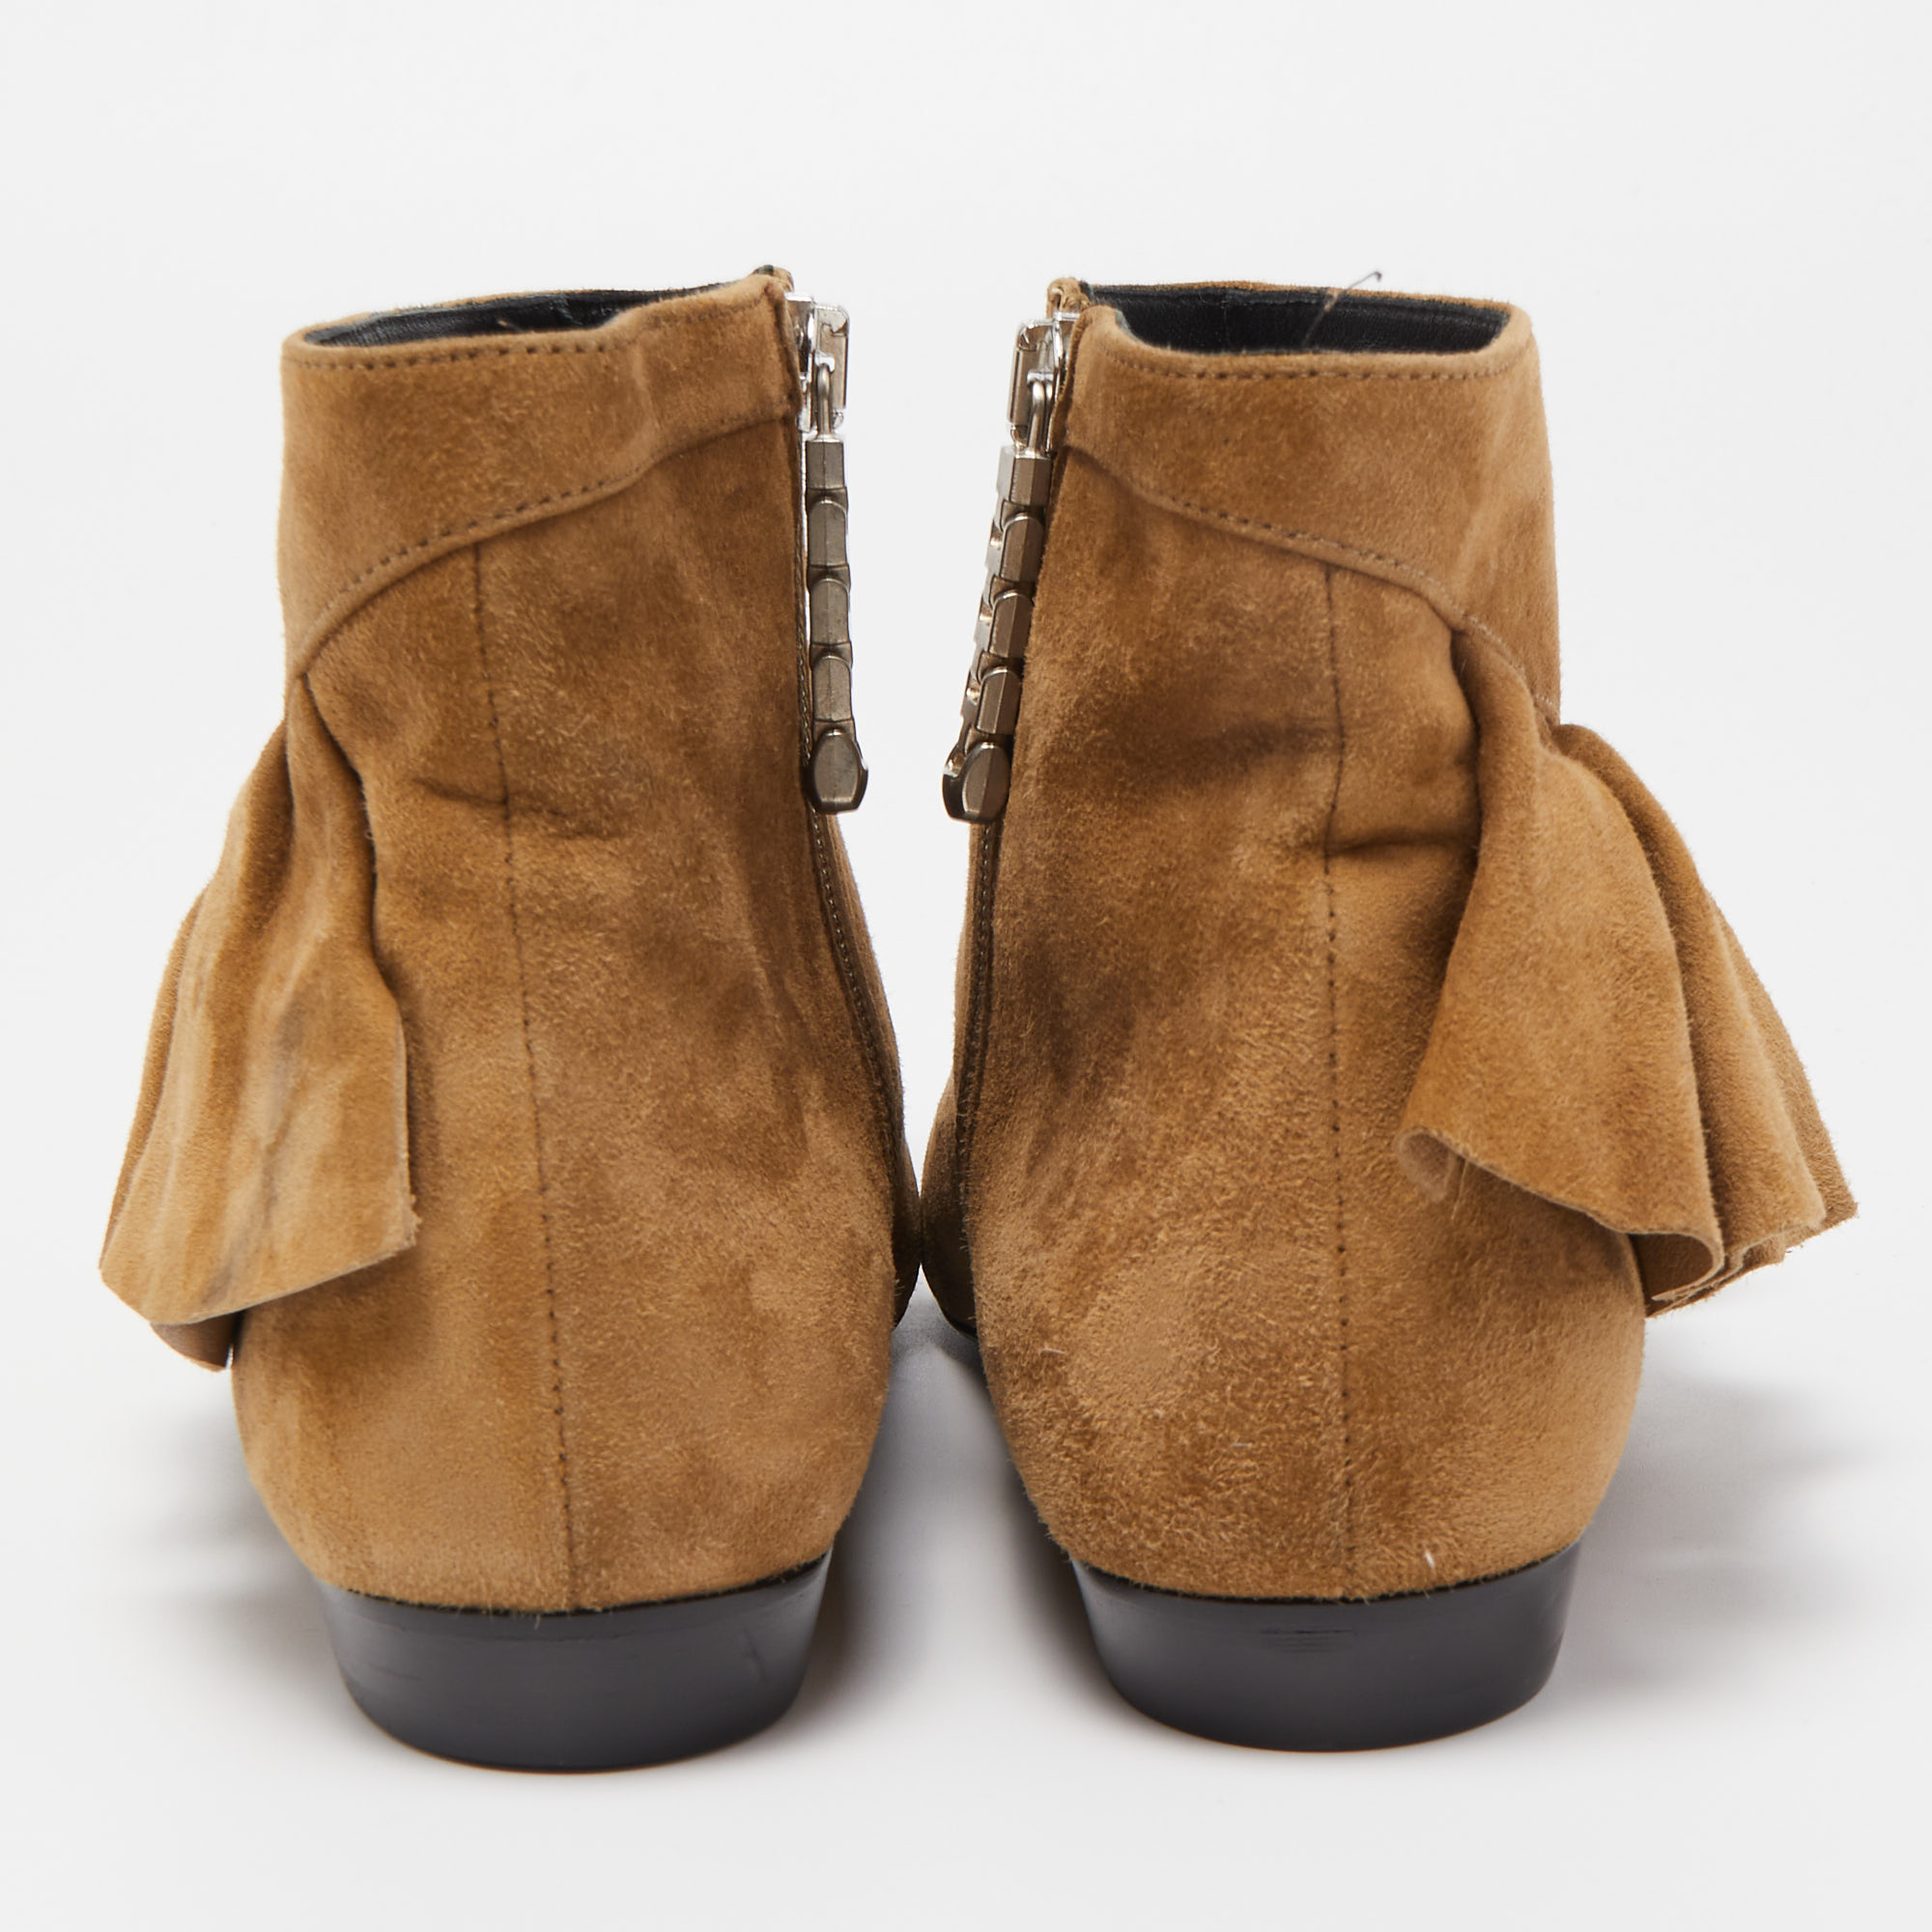 J.W.Anderson Brown Suede Ruffle Boots Size 36